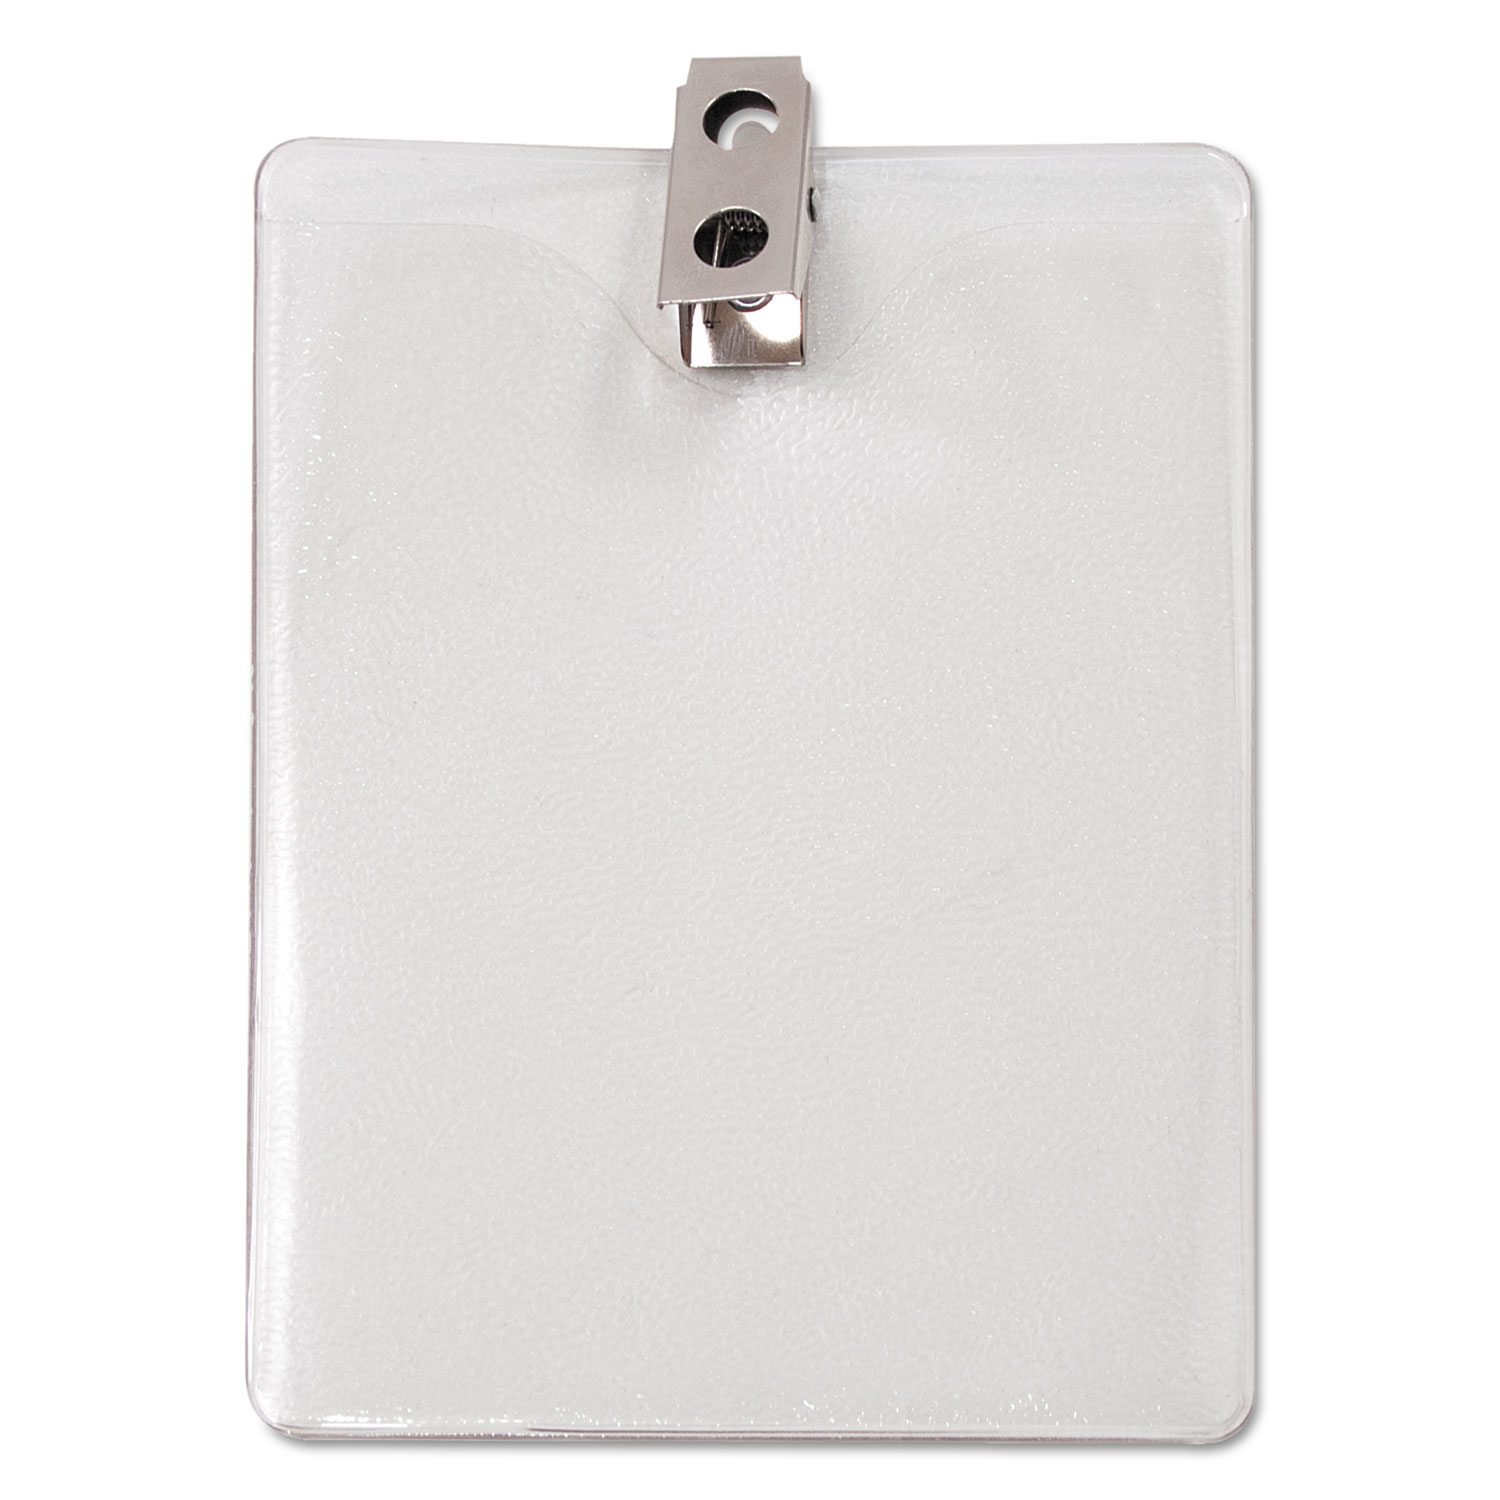 ID Badge Holder w/Clip, Vertical, 3w x 4h, Clear, 50/Pack